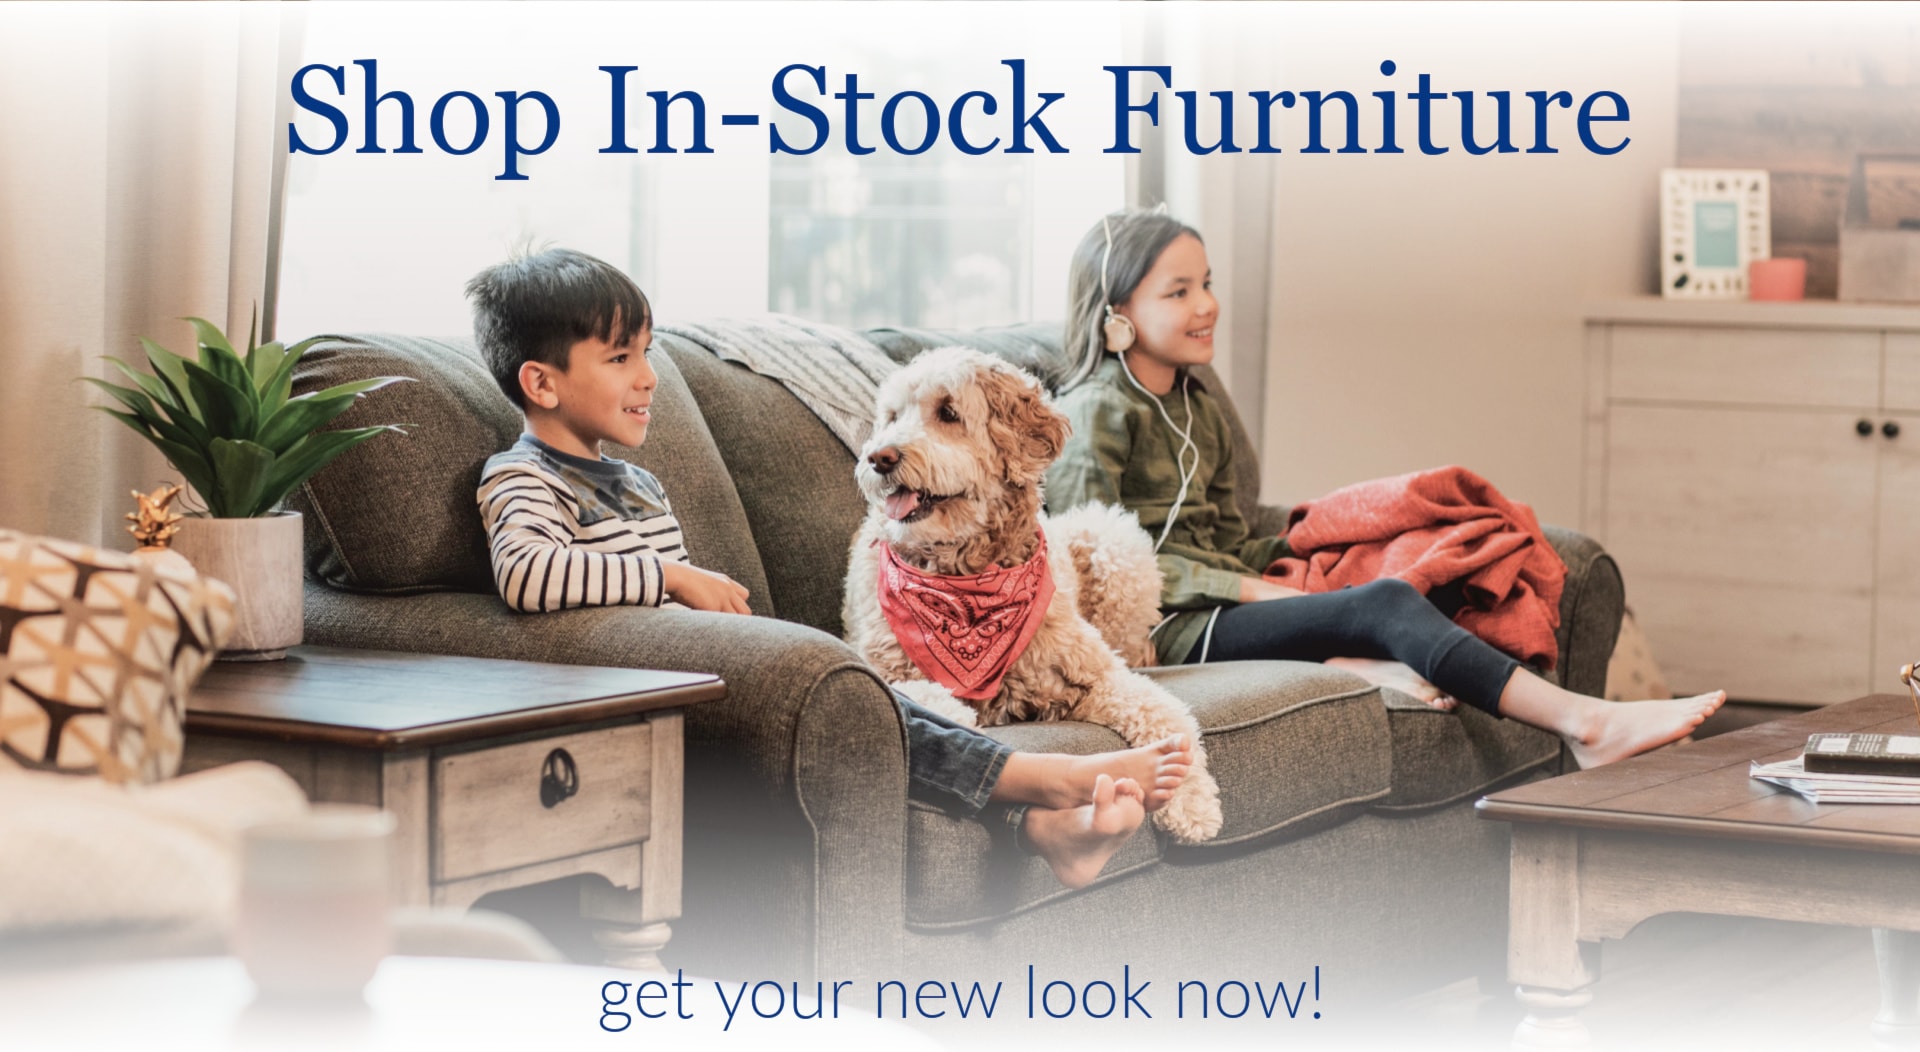 Home Living Furniture  Best Furniture Stores in New Jersey - Discount  Prices, NJ